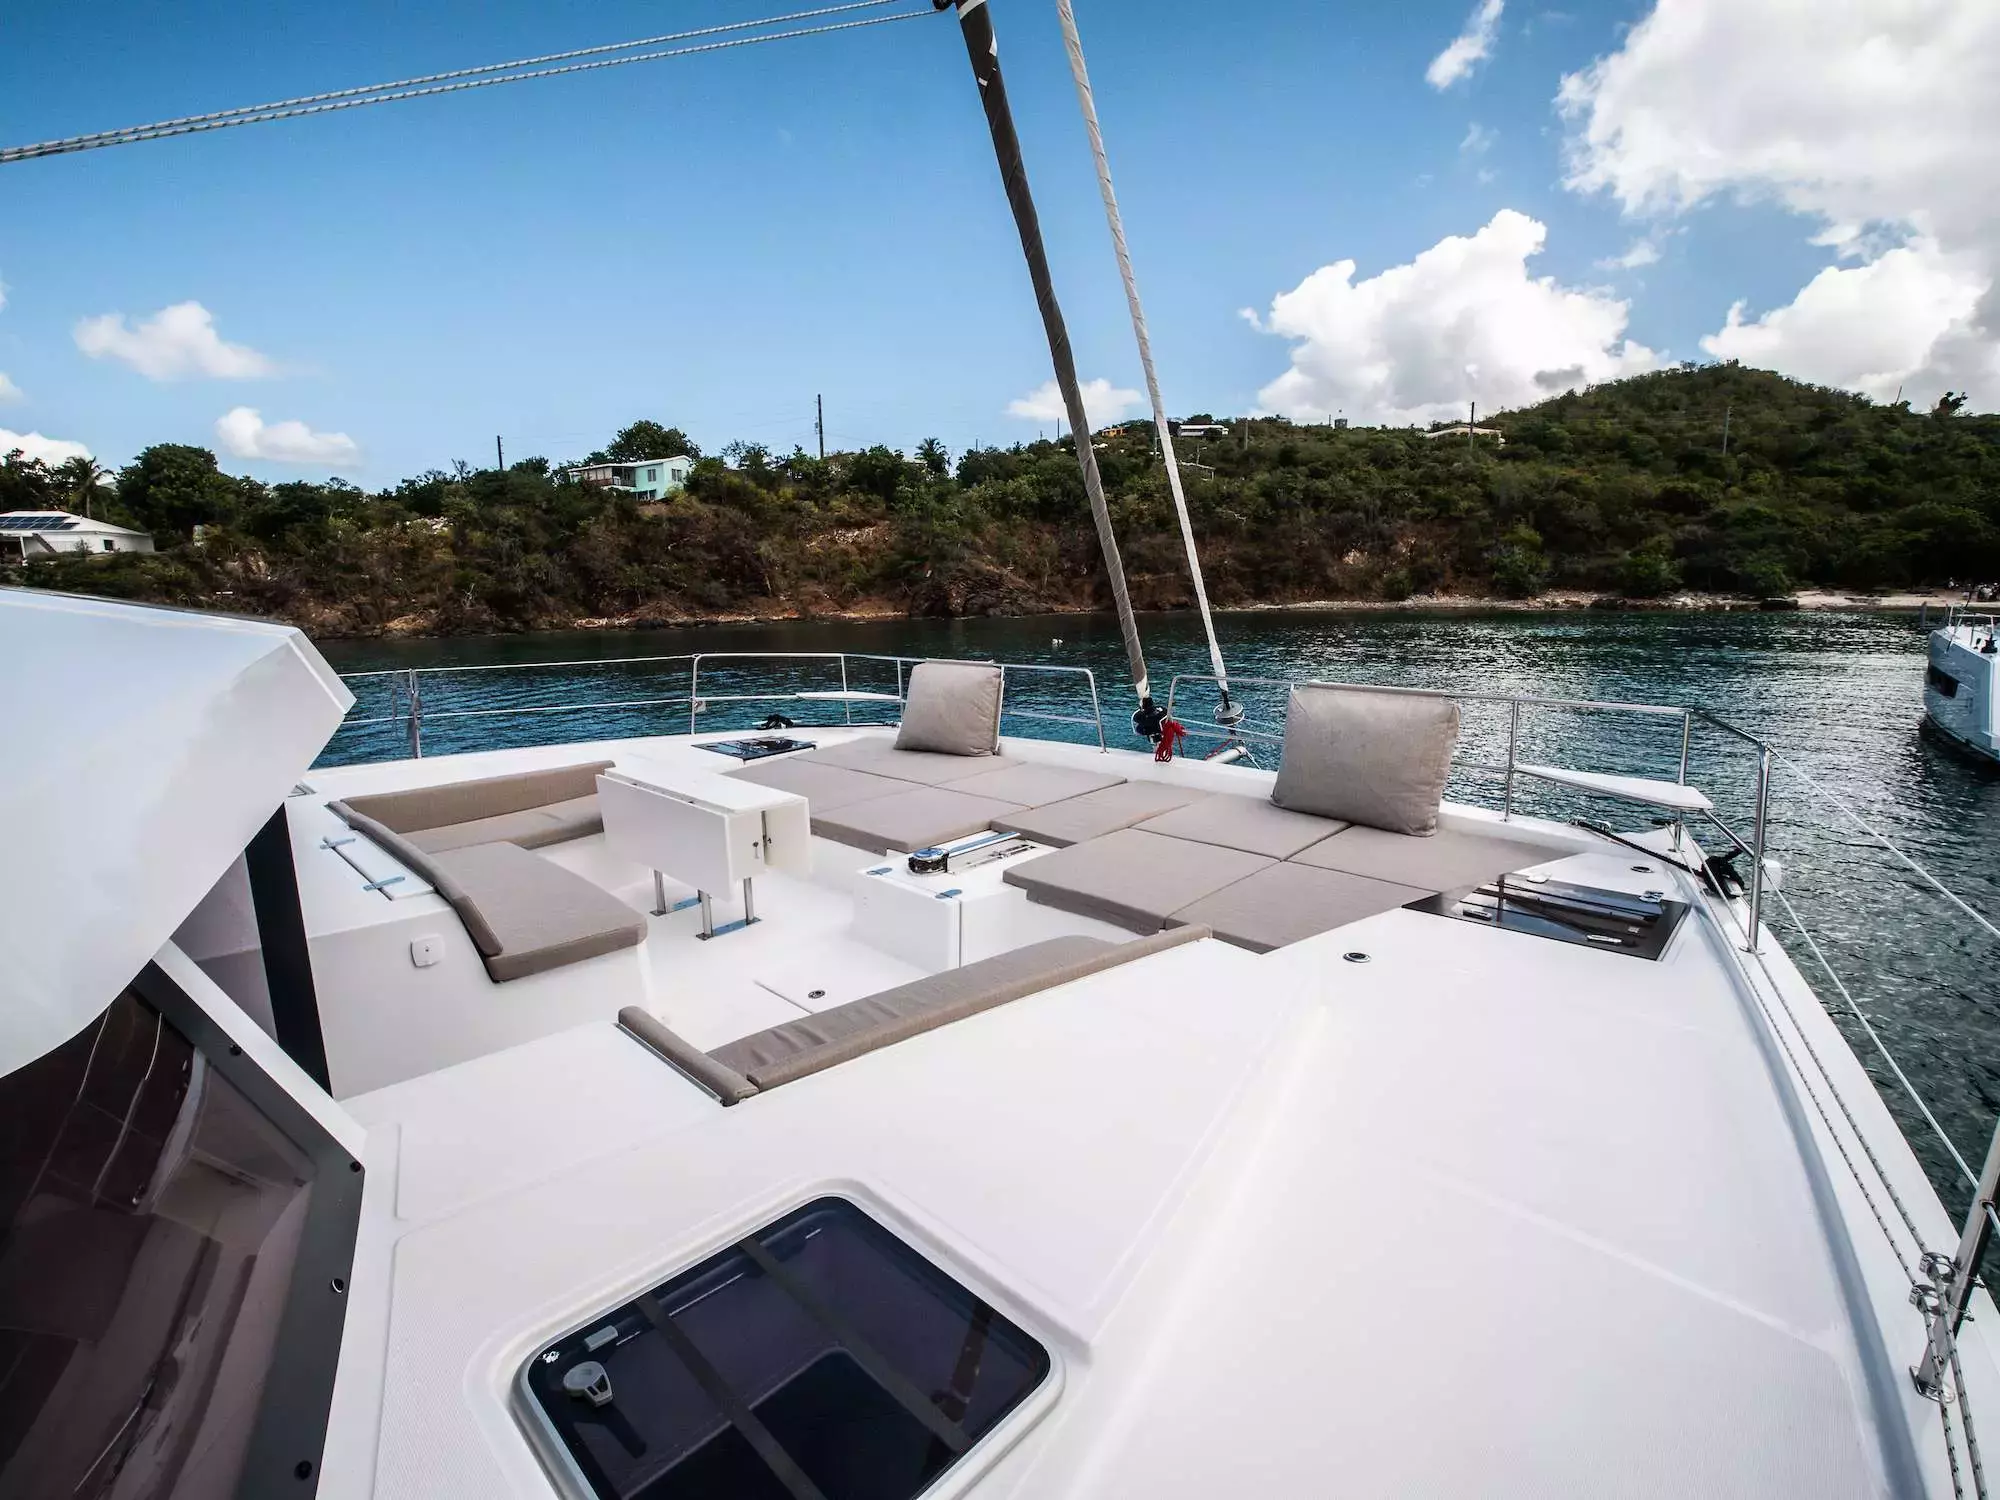 Escapade I by Bali Catamarans - Top rates for a Charter of a private Luxury Catamaran in US Virgin Islands